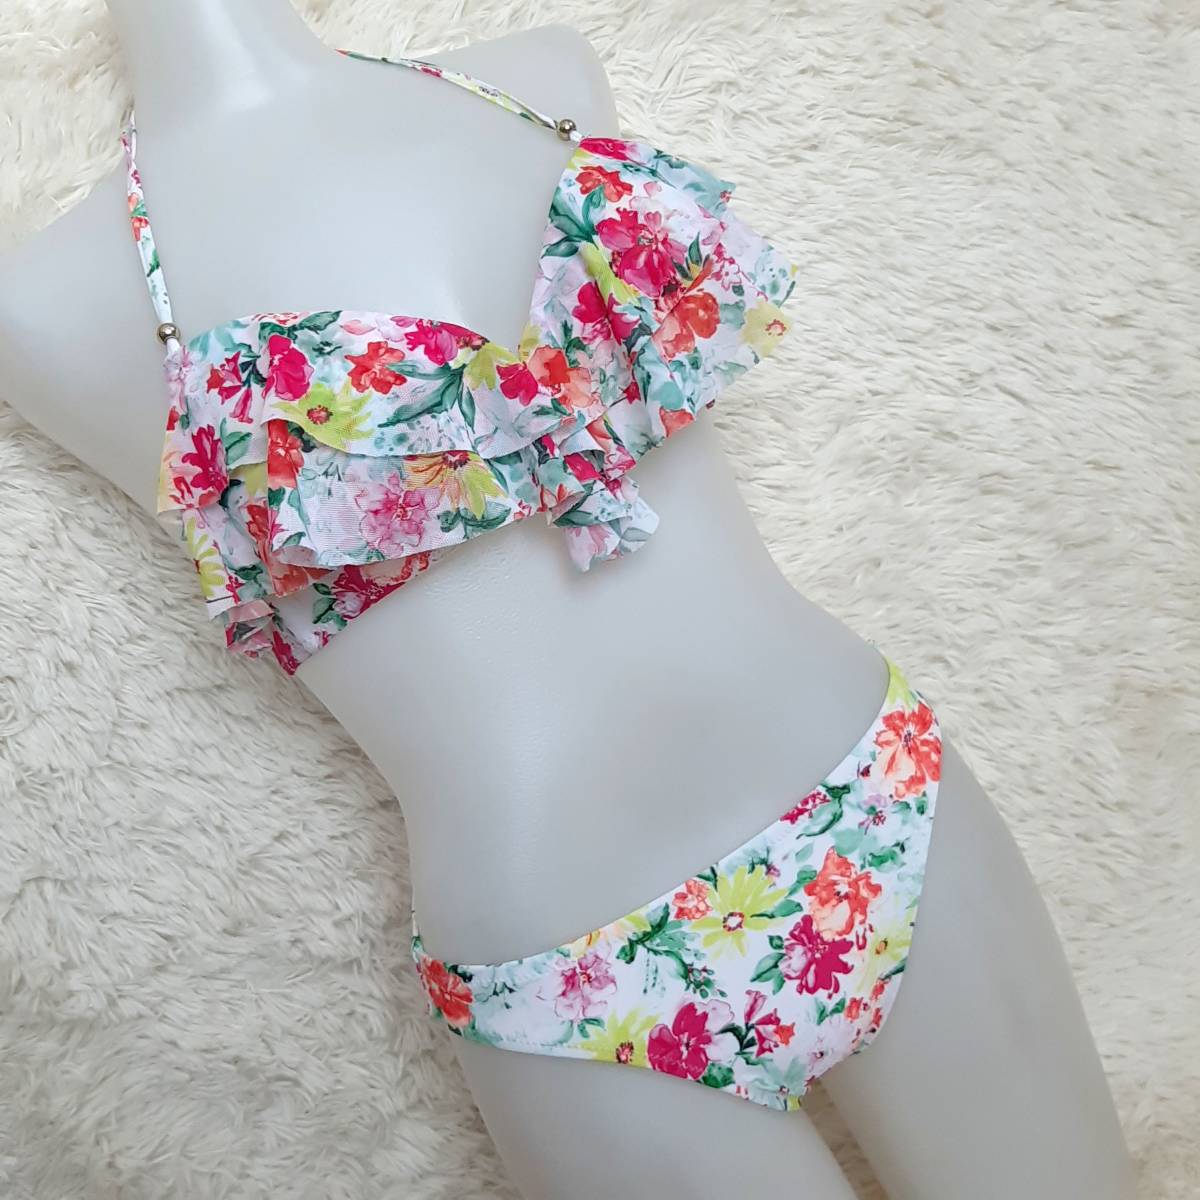  anonymity delivery * floral print lemon pad ... wire bikini frill piling swimsuit 9Mo